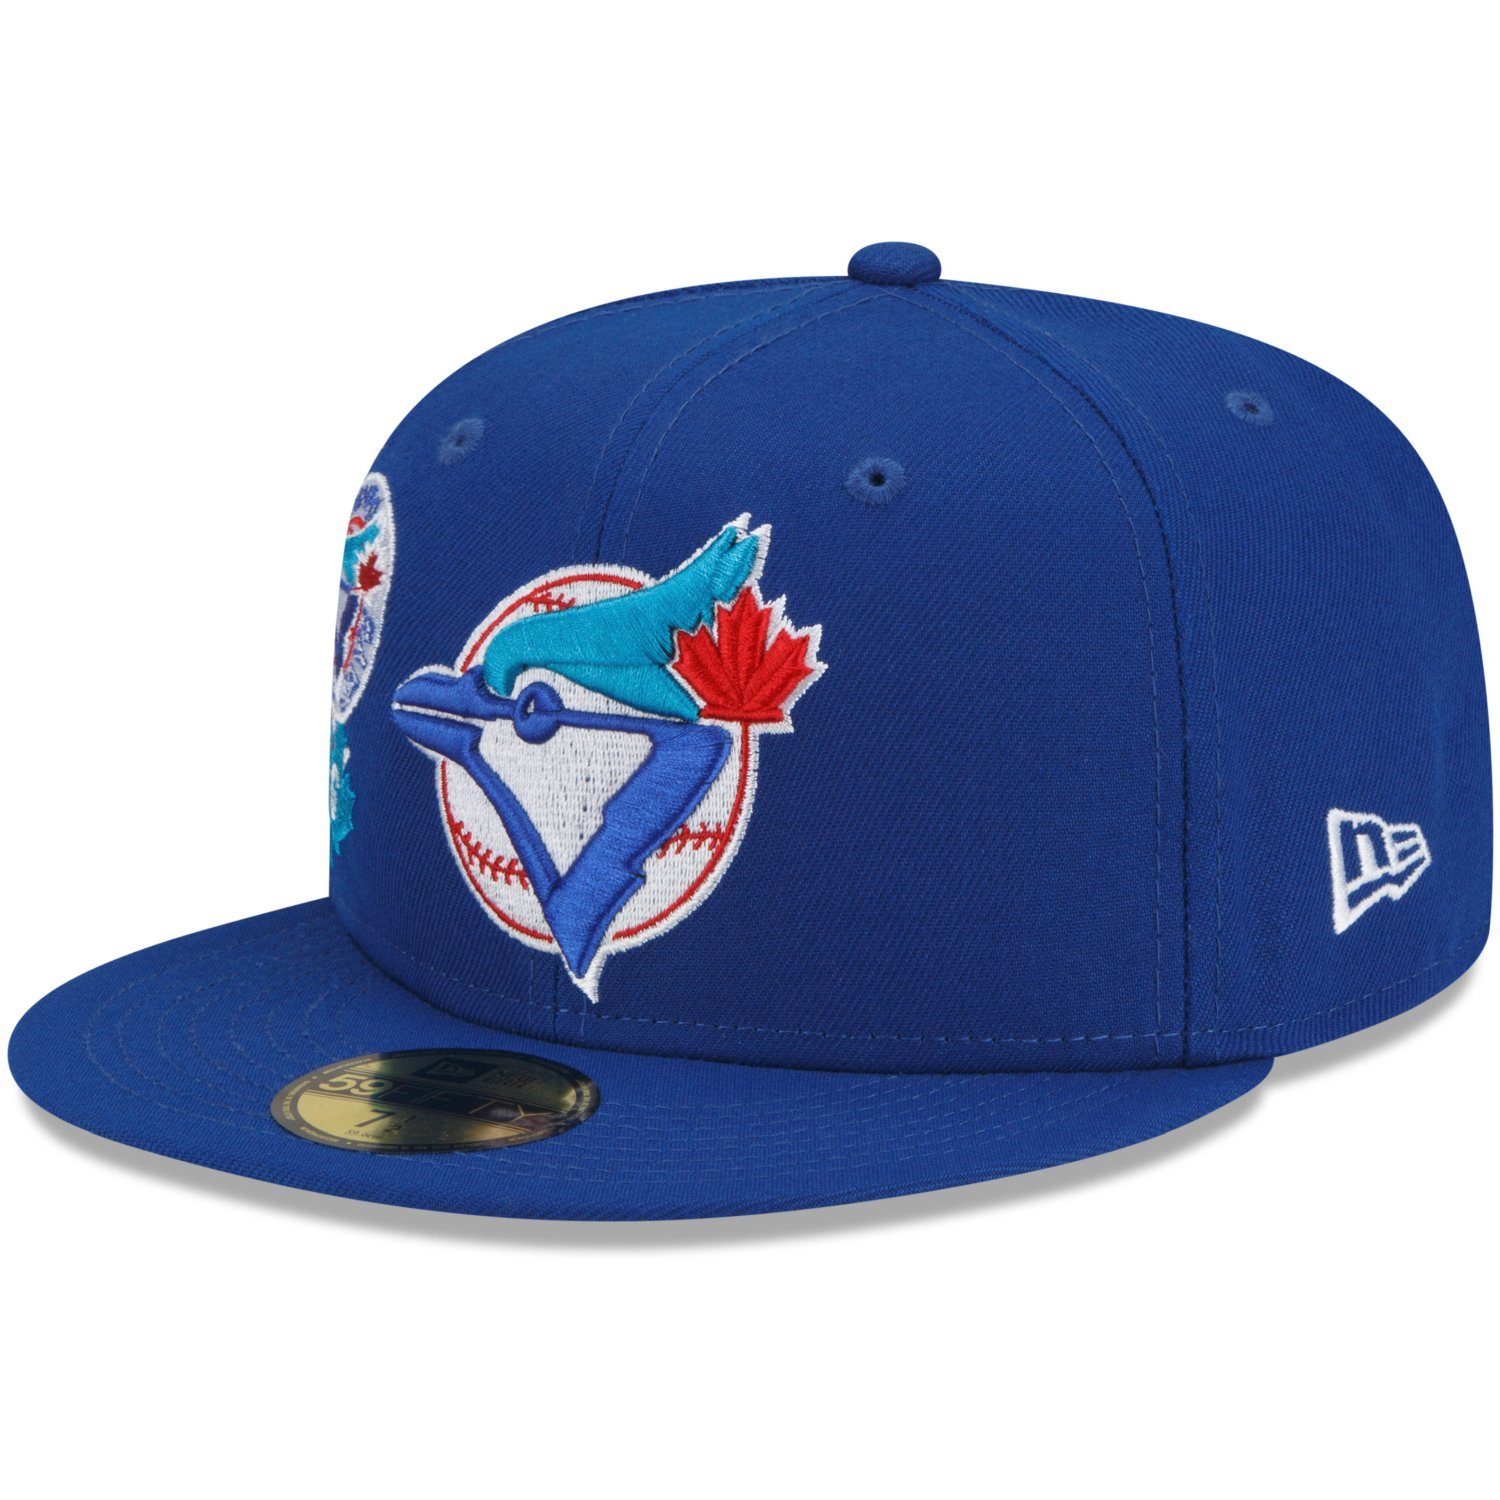 New Era 59Fifty Toronto CLUSTER CITY Jays Cap Fitted